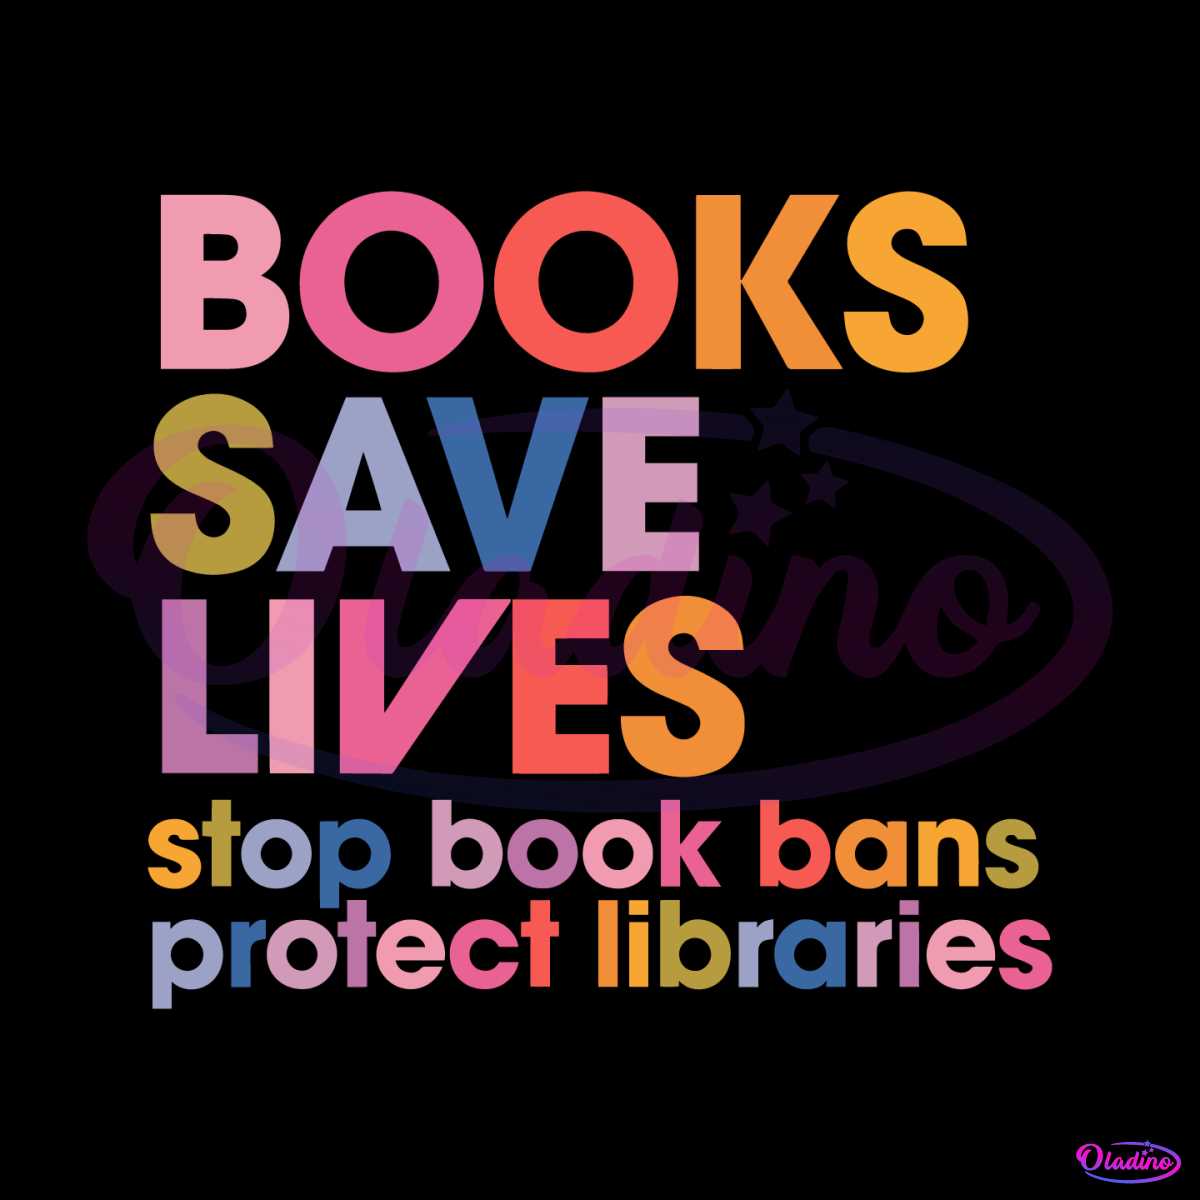 banned-books-week-books-save-lives-svg-graphic-design-files